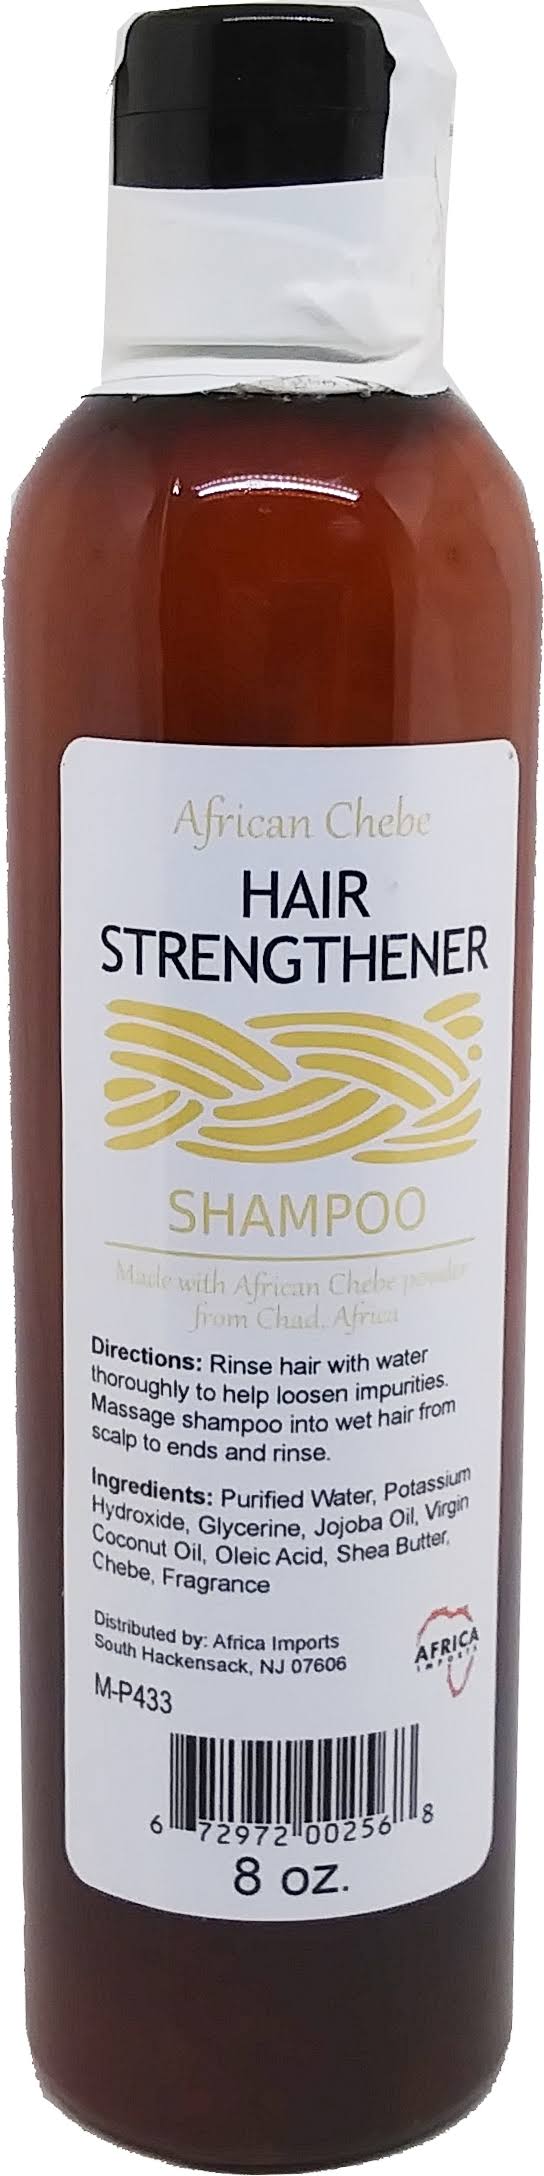 African Chebe Shampoo Hair Strengthener [Natural - 240ml]